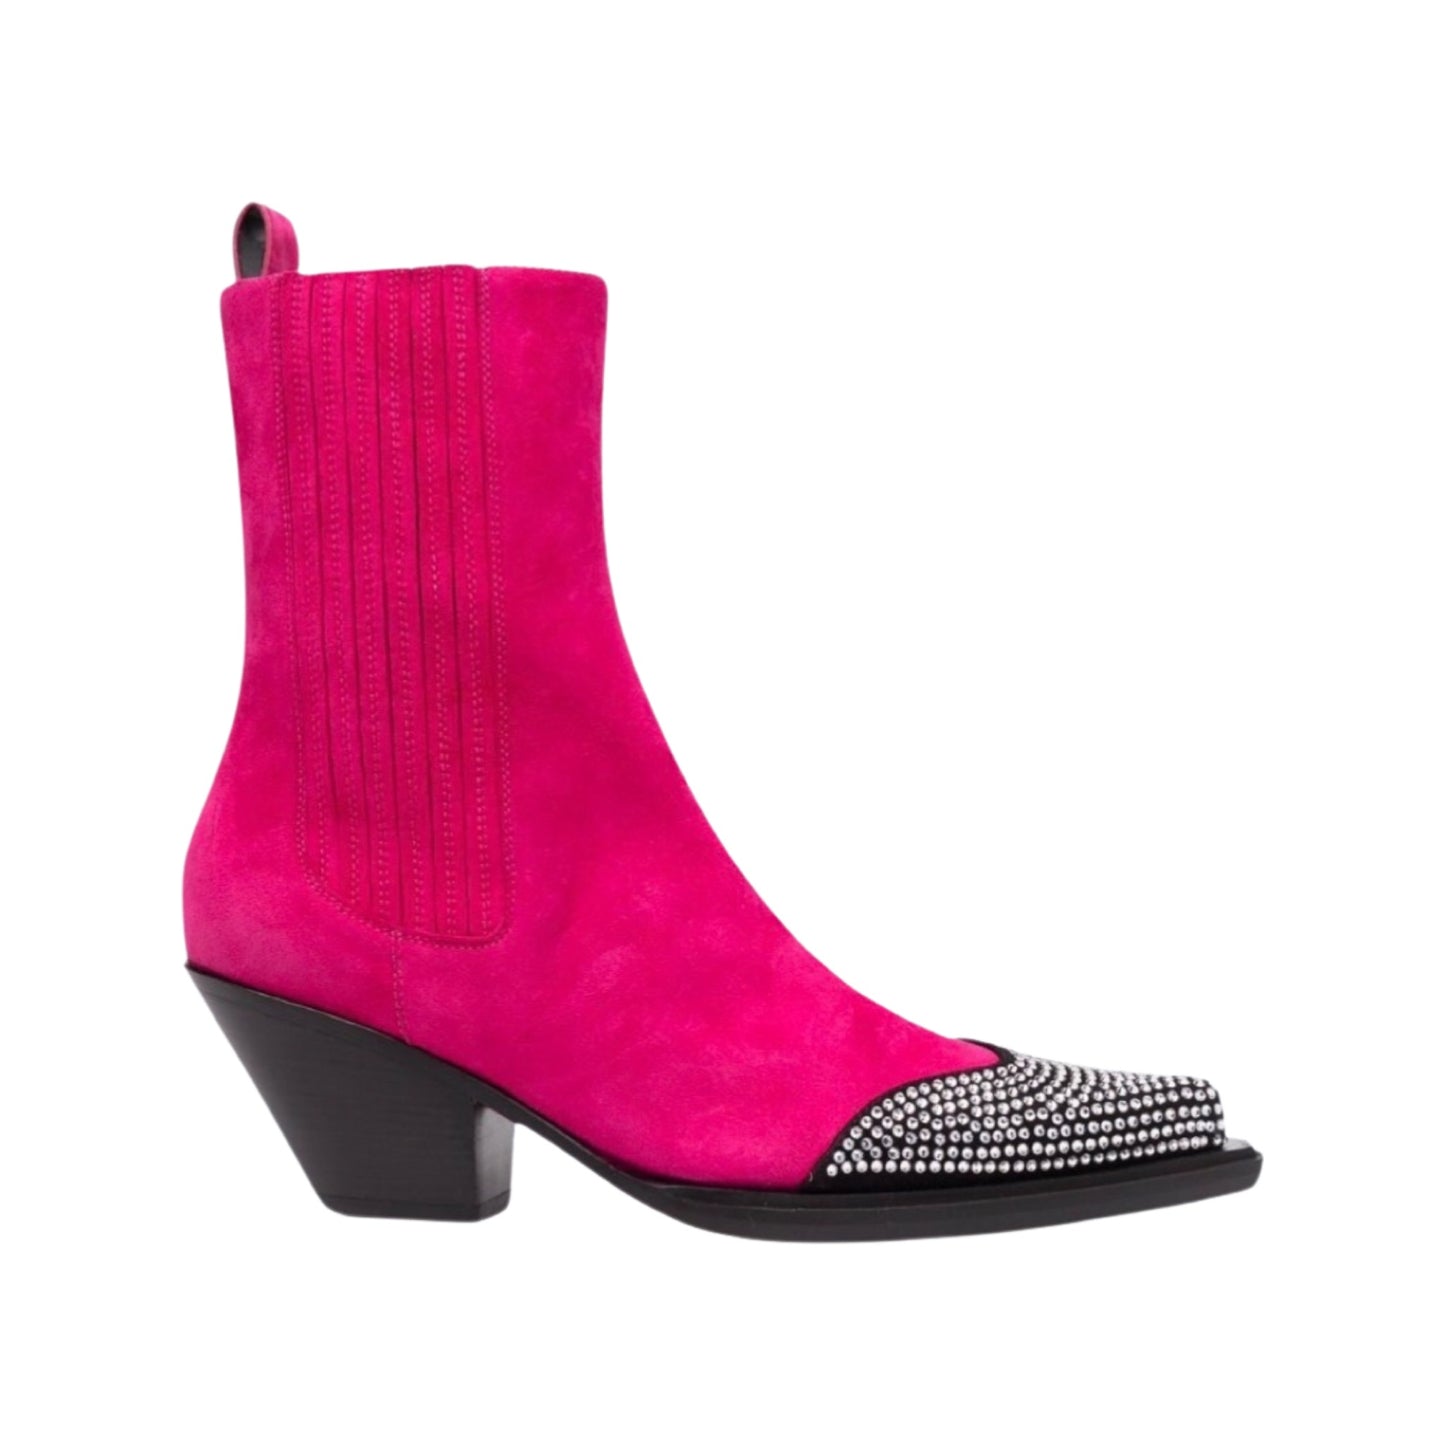 Texas Crystal  Boot Suede Hot Pink was $1995